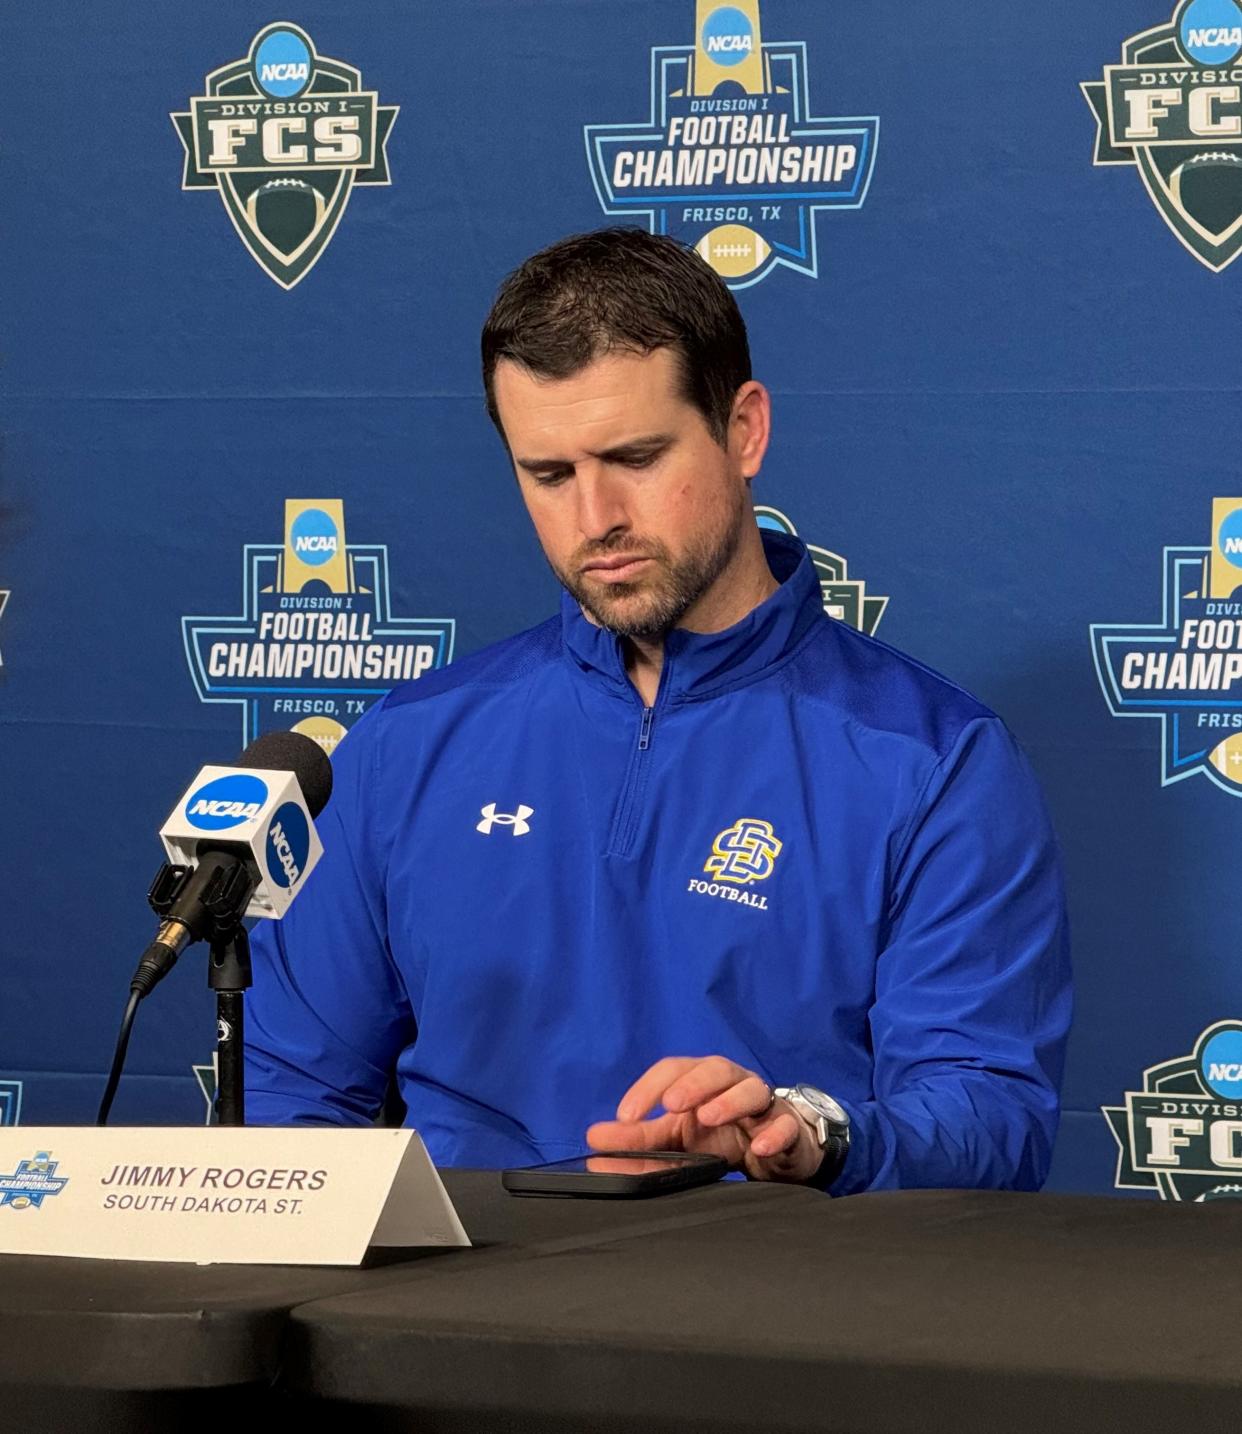 South Dakota State head coach Jimmy Rogers speaks to the media ahead of the Jackrabbits third consecutive appearance in the FCS championship game.